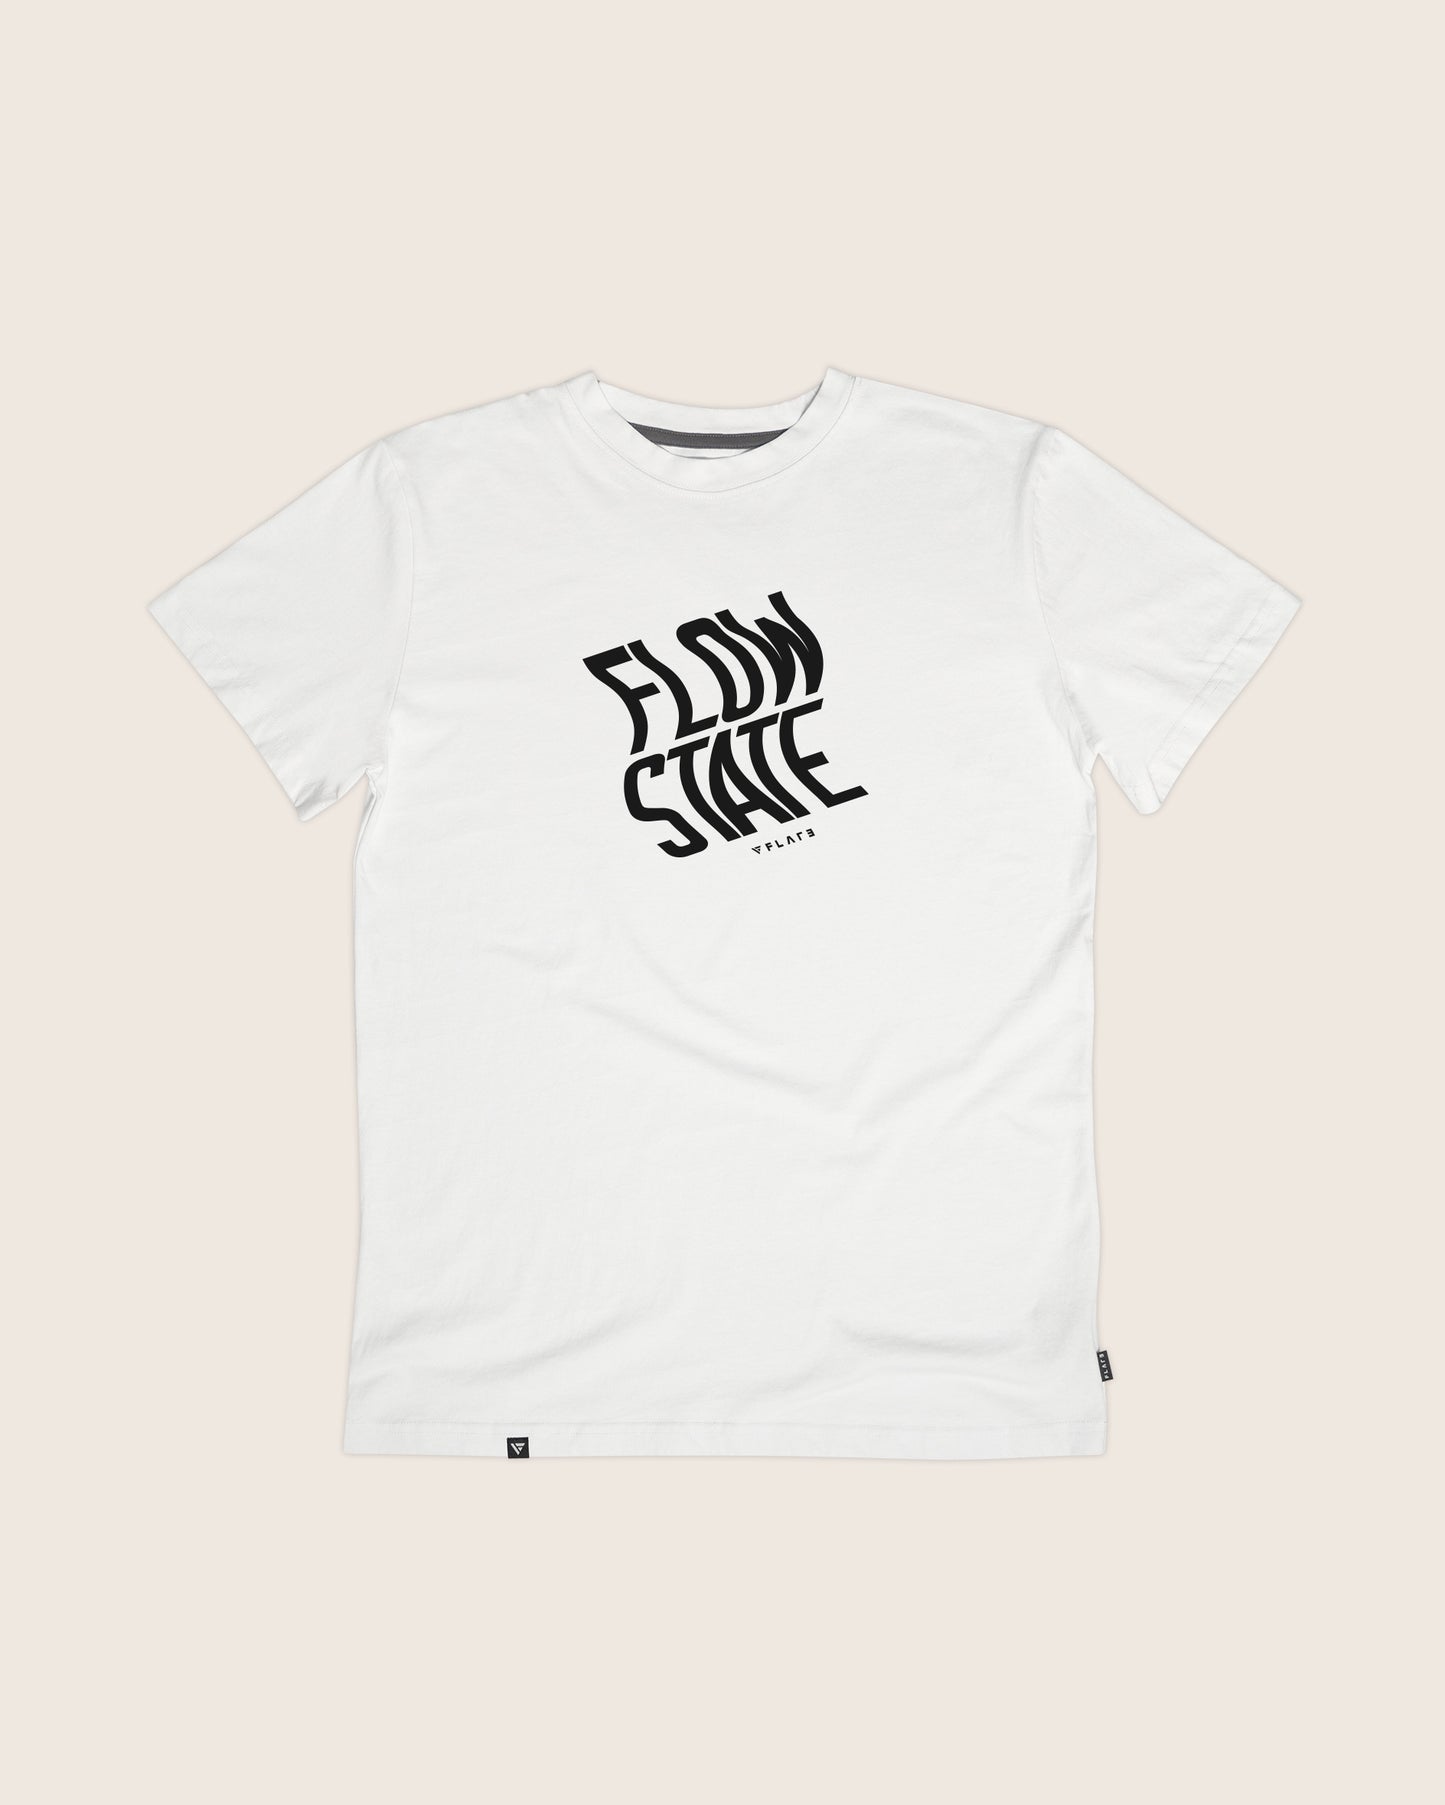 Flow State White T